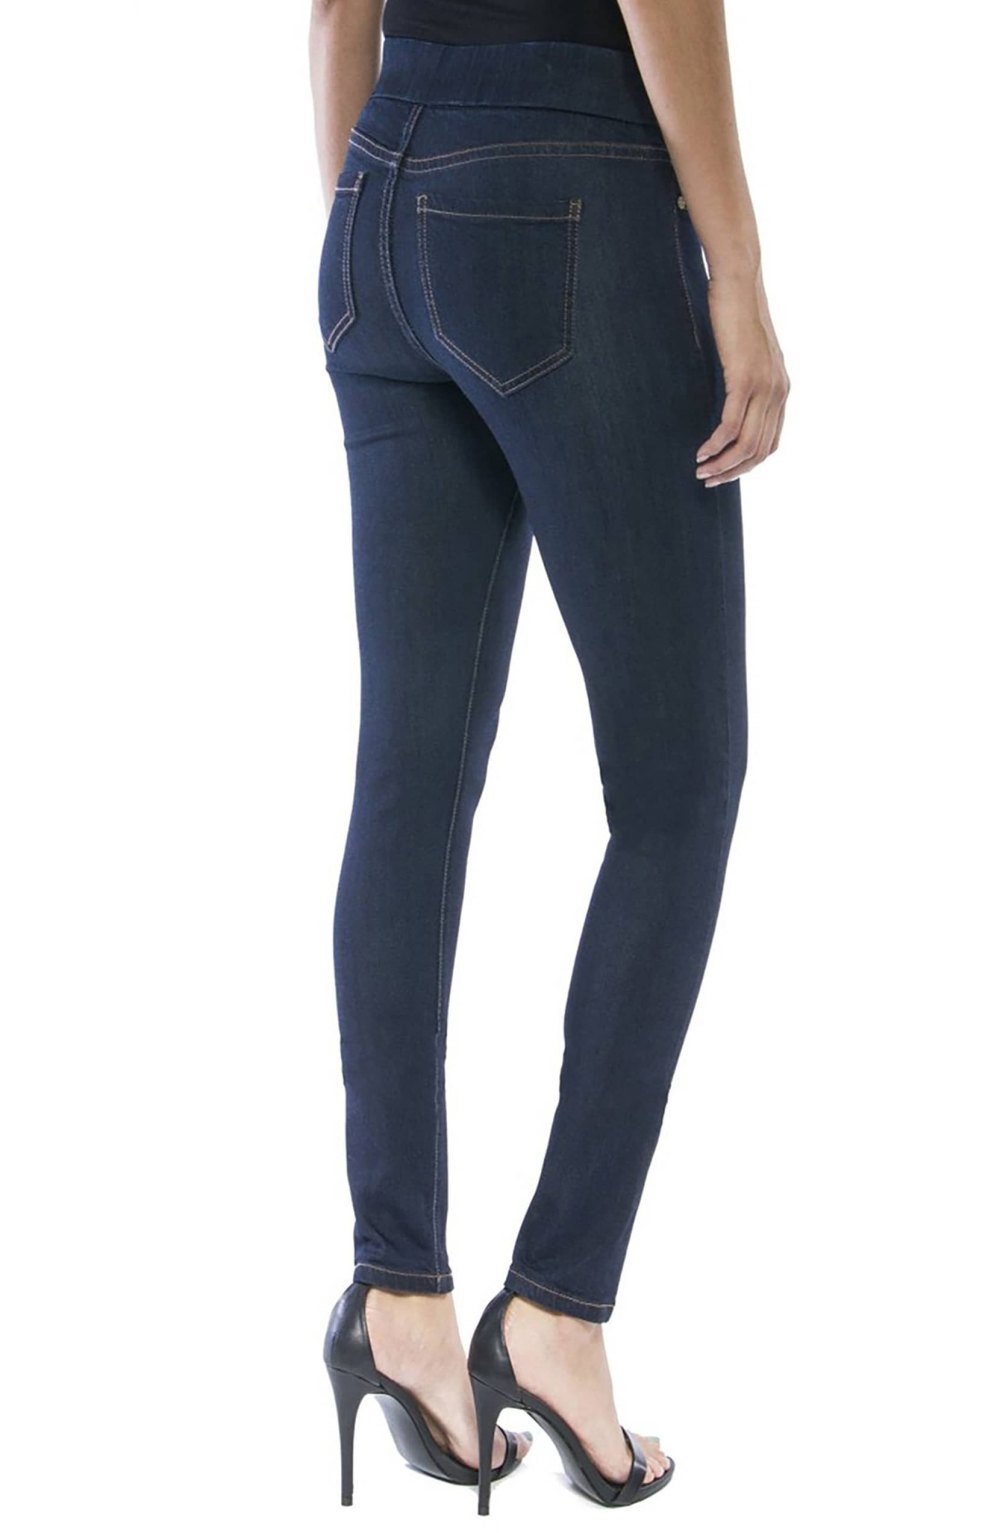 Shop These Soft Stretch Denim Leggings at Nordstrom | Us Weekly